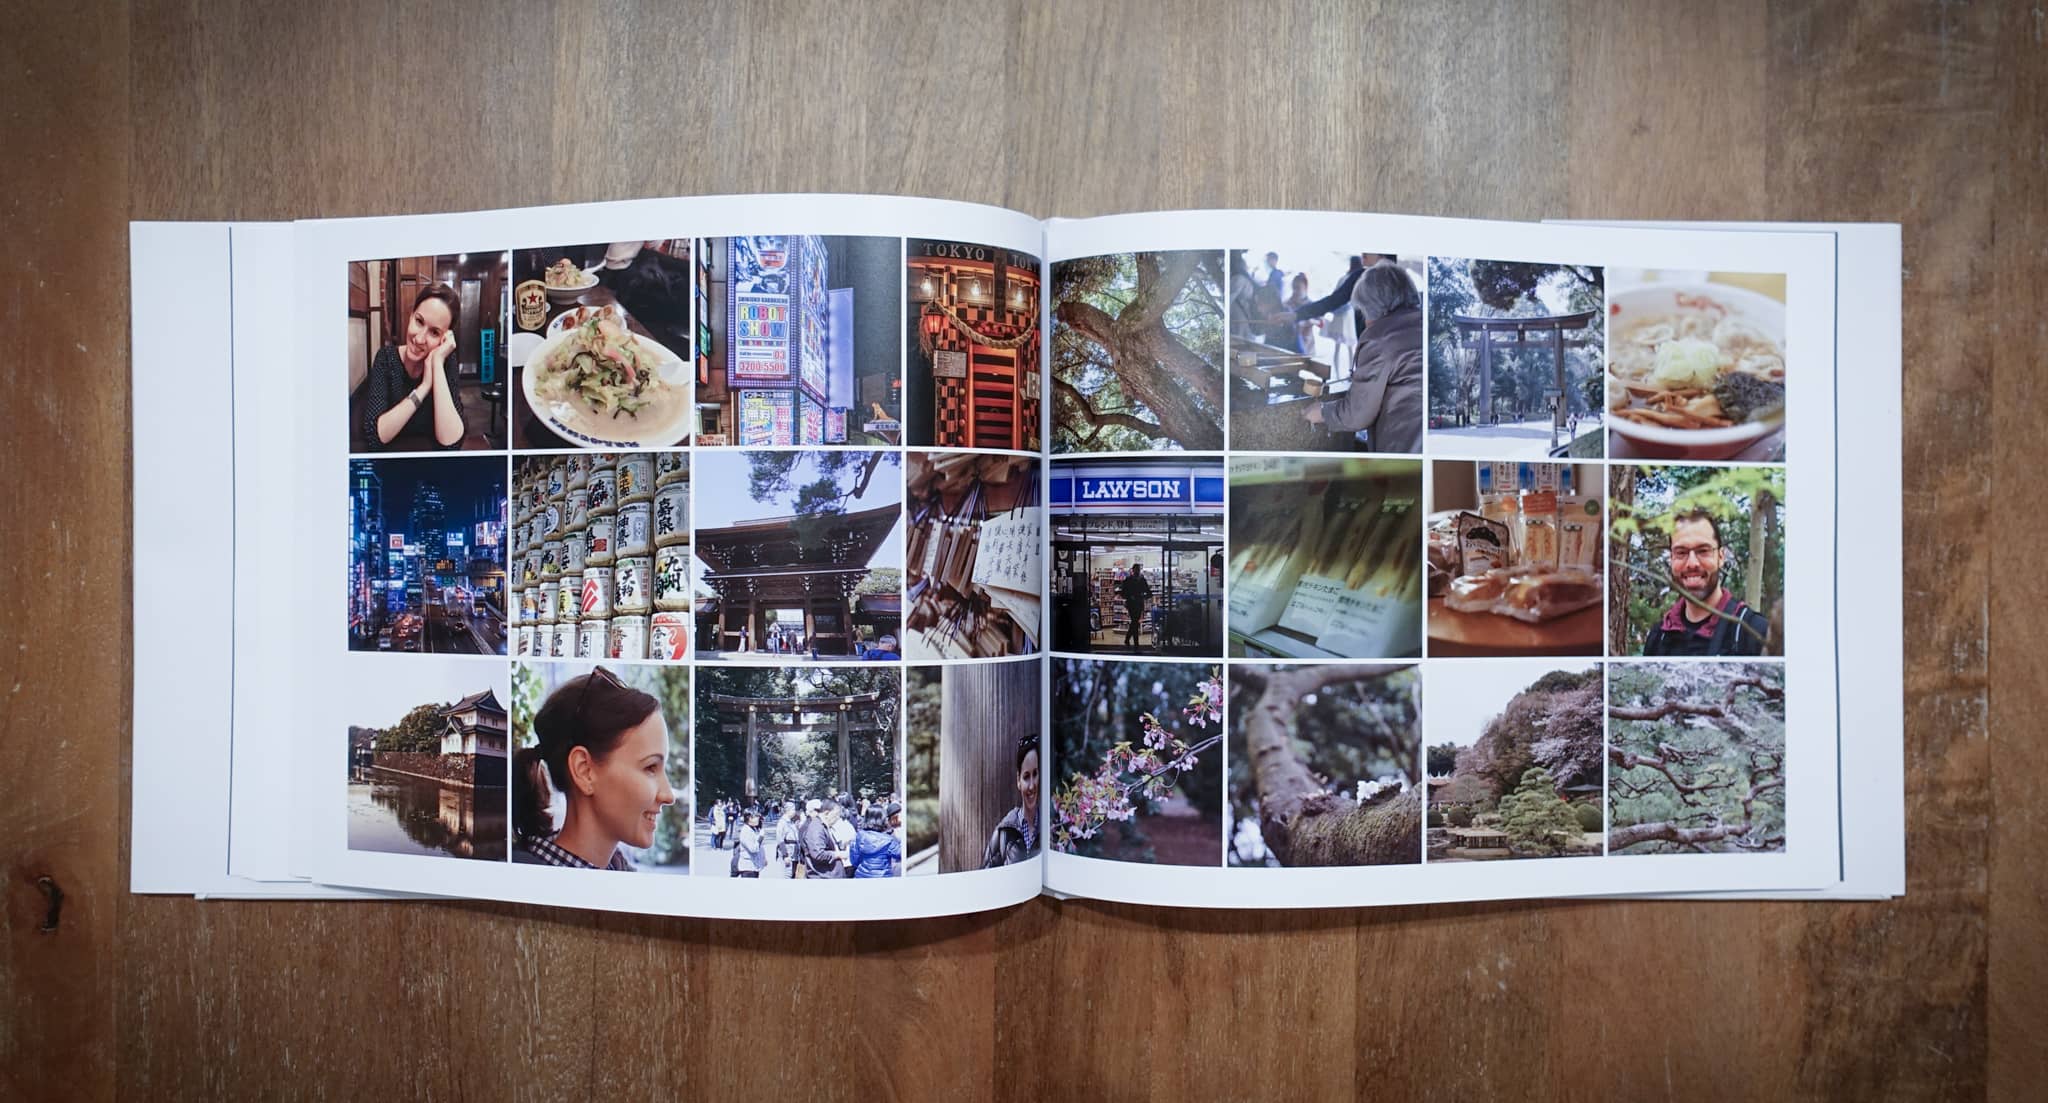 Jim S. makes a photobook of his B roll shots from his travels